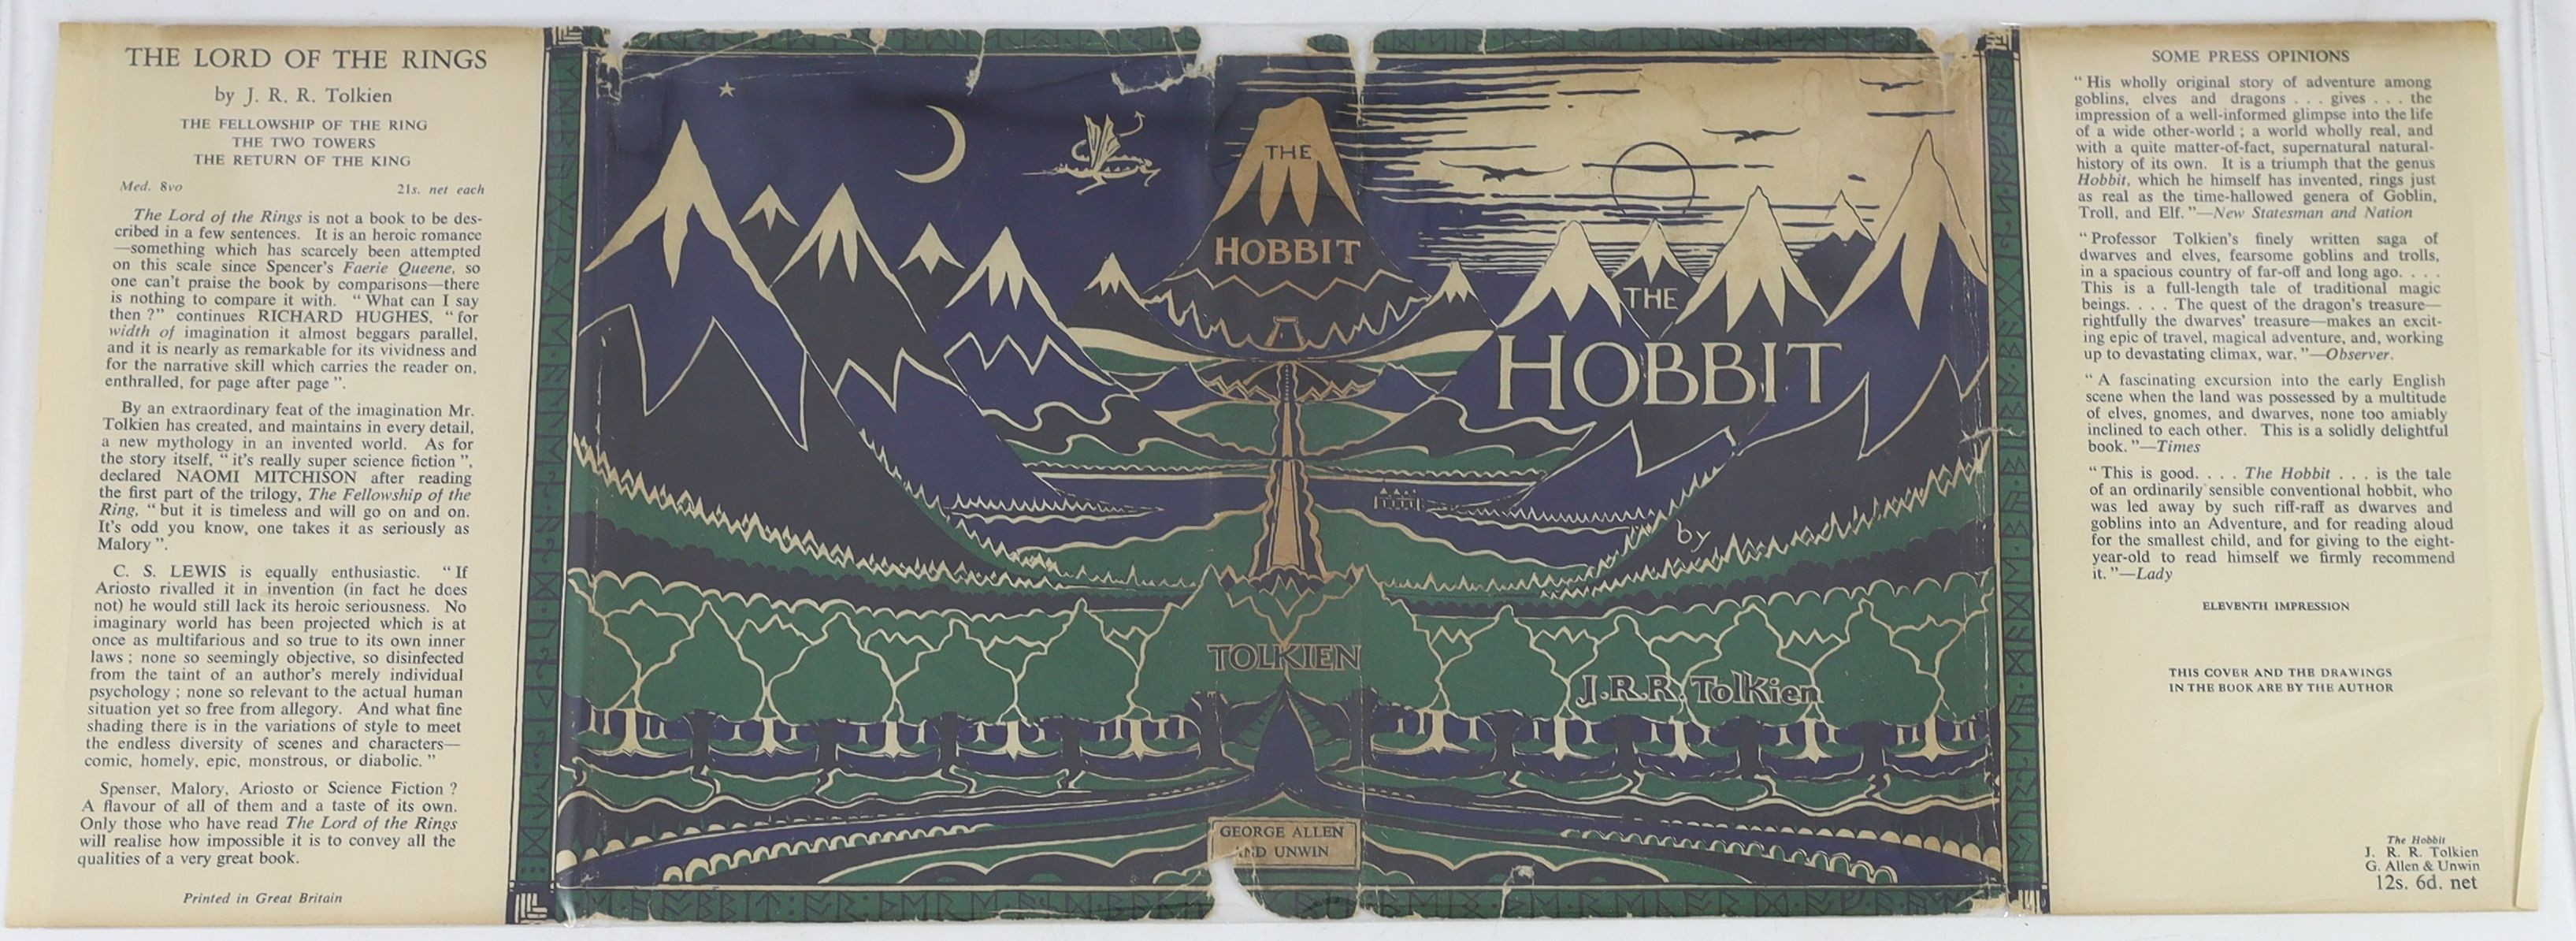 Tolkien, John Ronald Reuel - The Hobbit, 2nd edition, 11th impression, with colour frontispiece, map endpapers, original green cloth in unclipped d/j, with small loss to spine head and foot and a few edge tears, ownershi